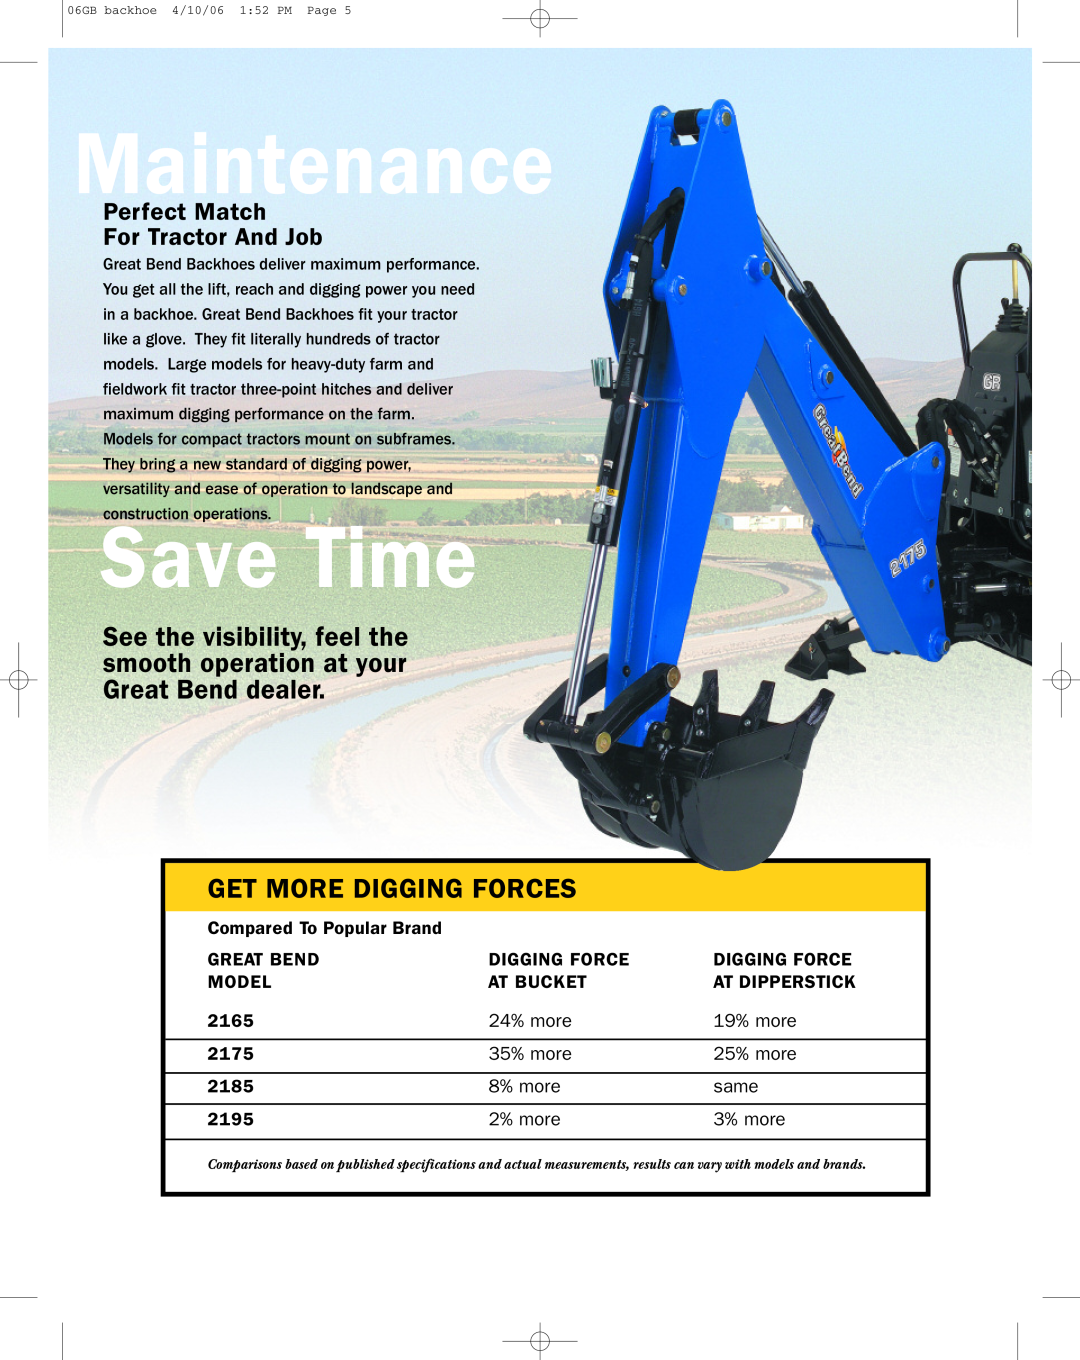 Bush Hog 2175 manual Maintenance, Save Time, Get More Digging Forces, Perfect Match For Tractor And Job 